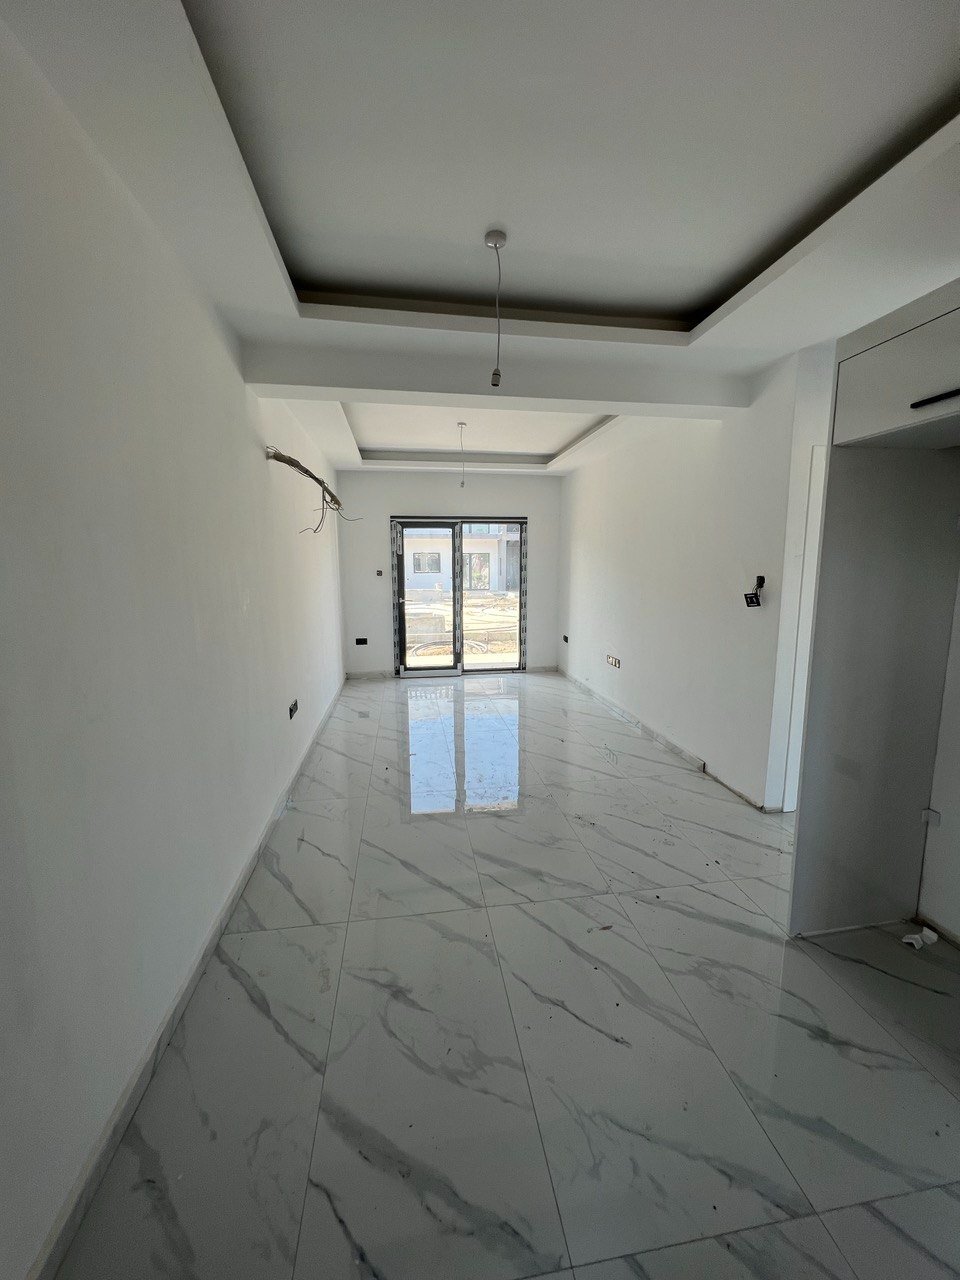 1 and 2 Bedroom Flats for sale in Kyrenia, Alsancak